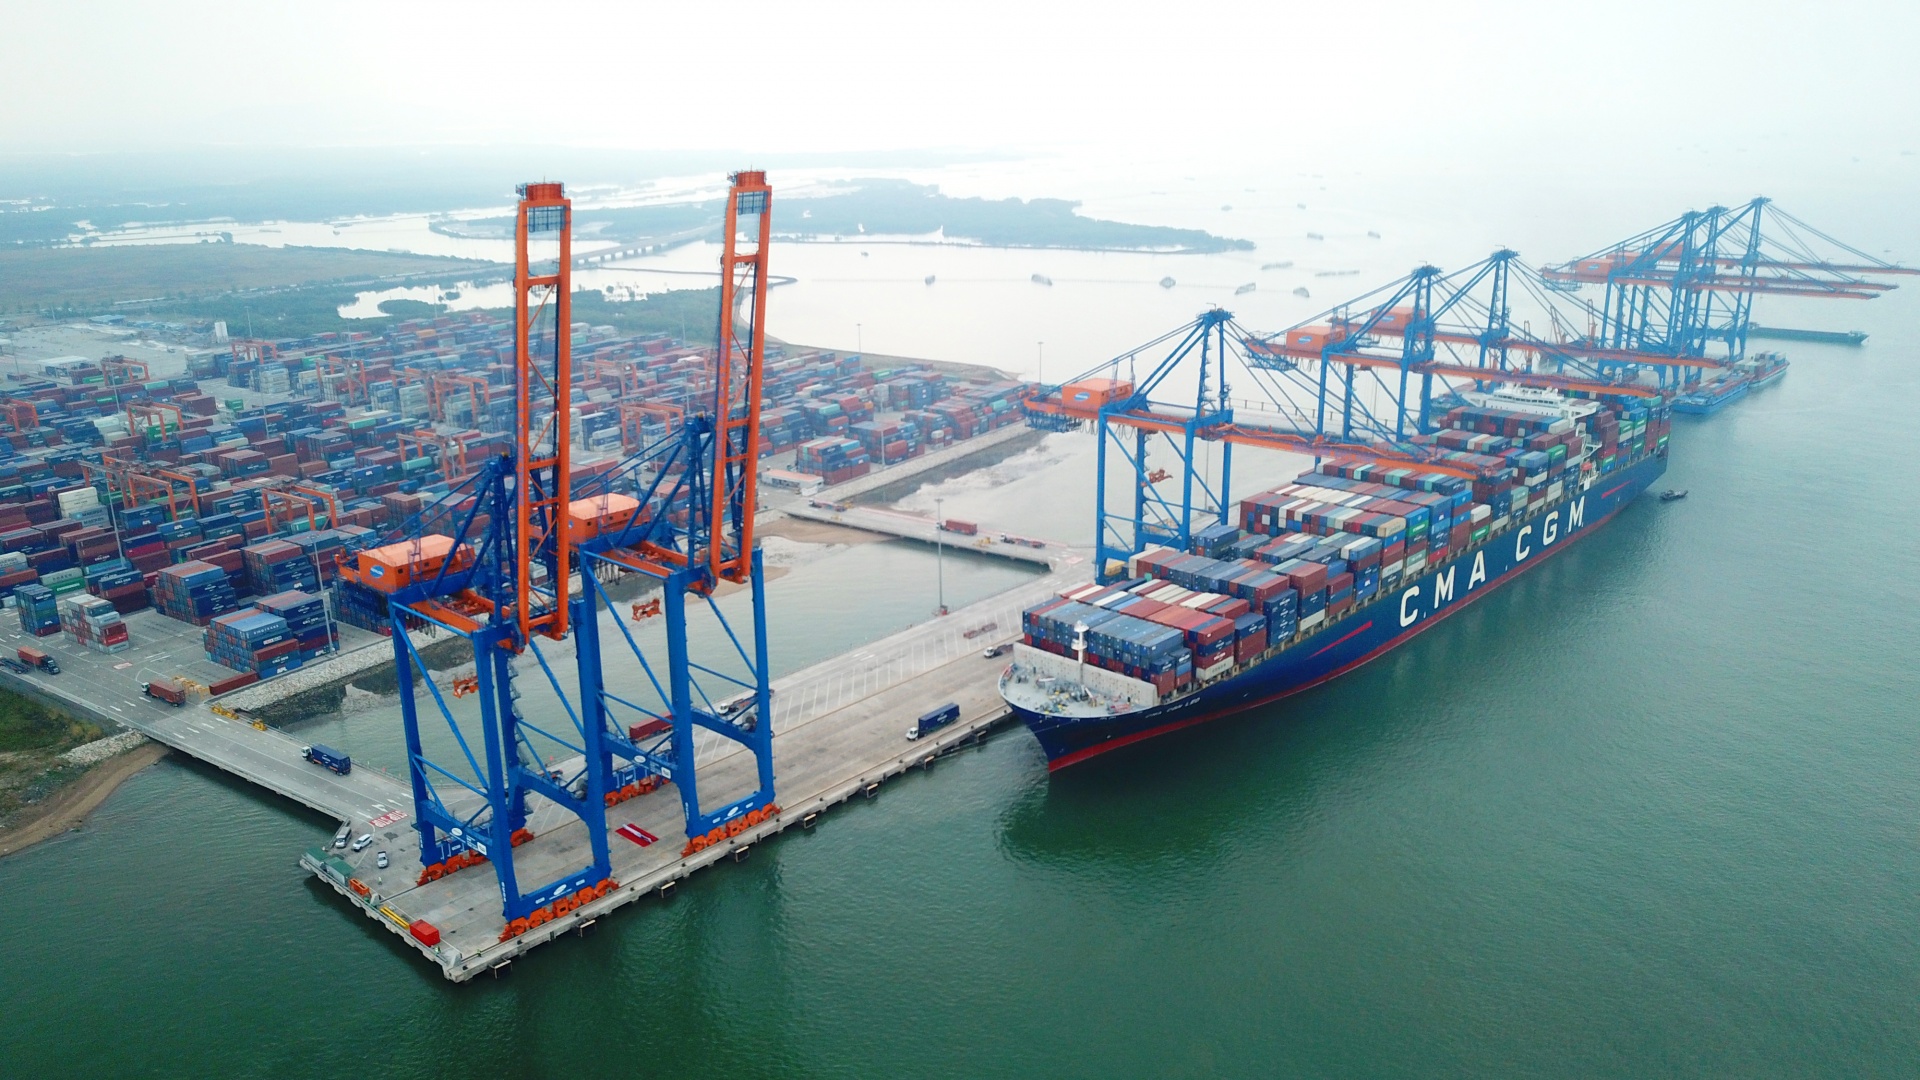 Gemalink Port marks its first million TEUs throughput after one year of operation